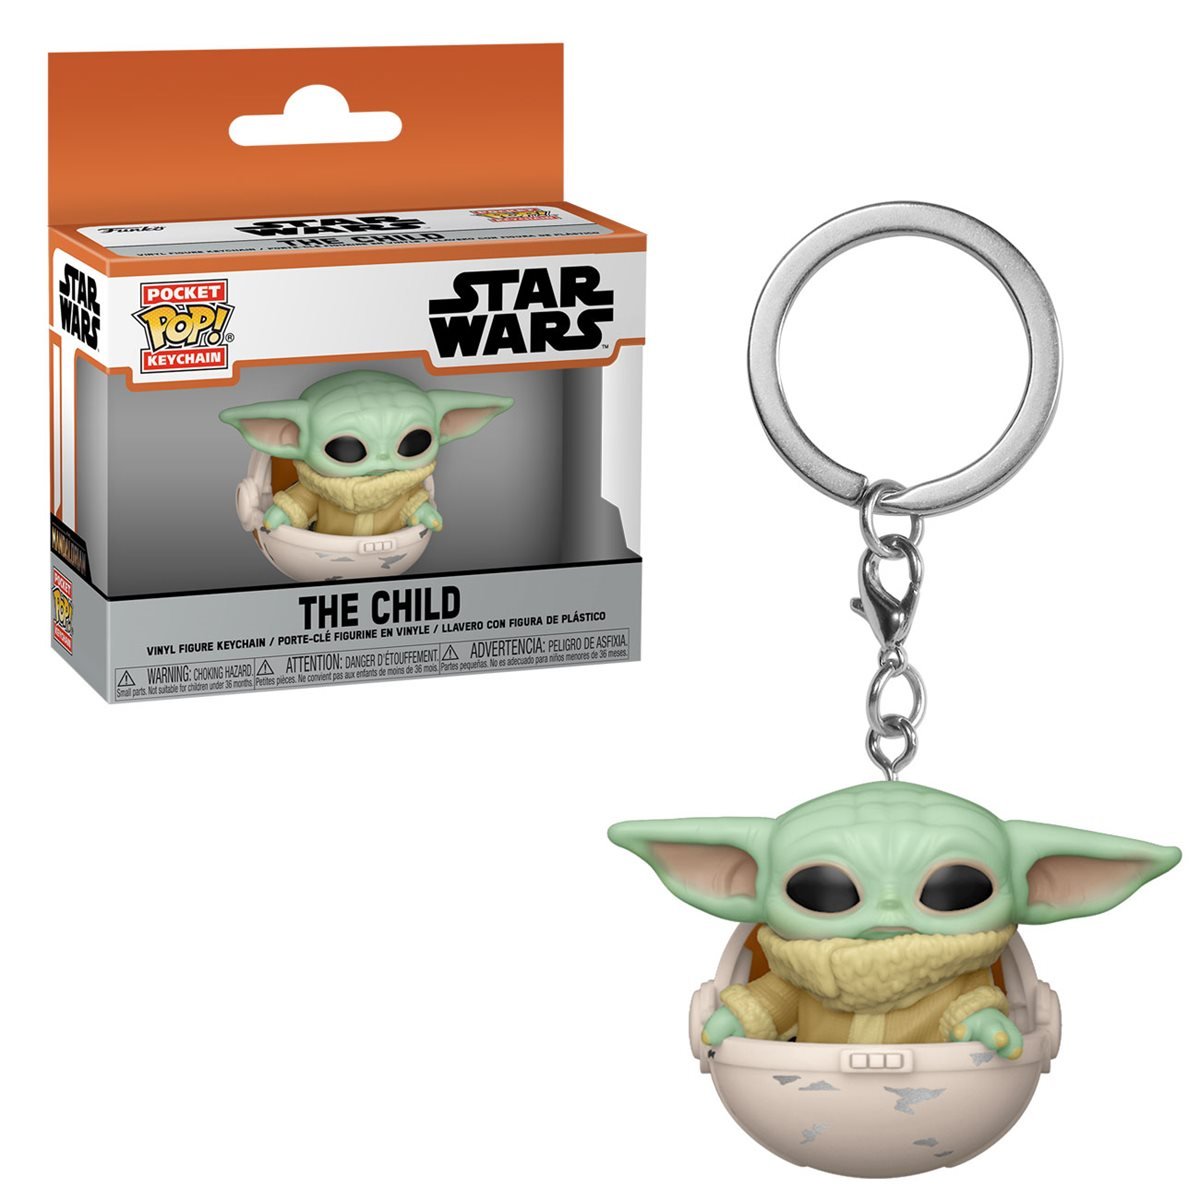 THE CHILD WITH CUP BABY YODA FUNKO POP KEYCHAIN STAR WARS MANDALORIAN PRE ORDER 